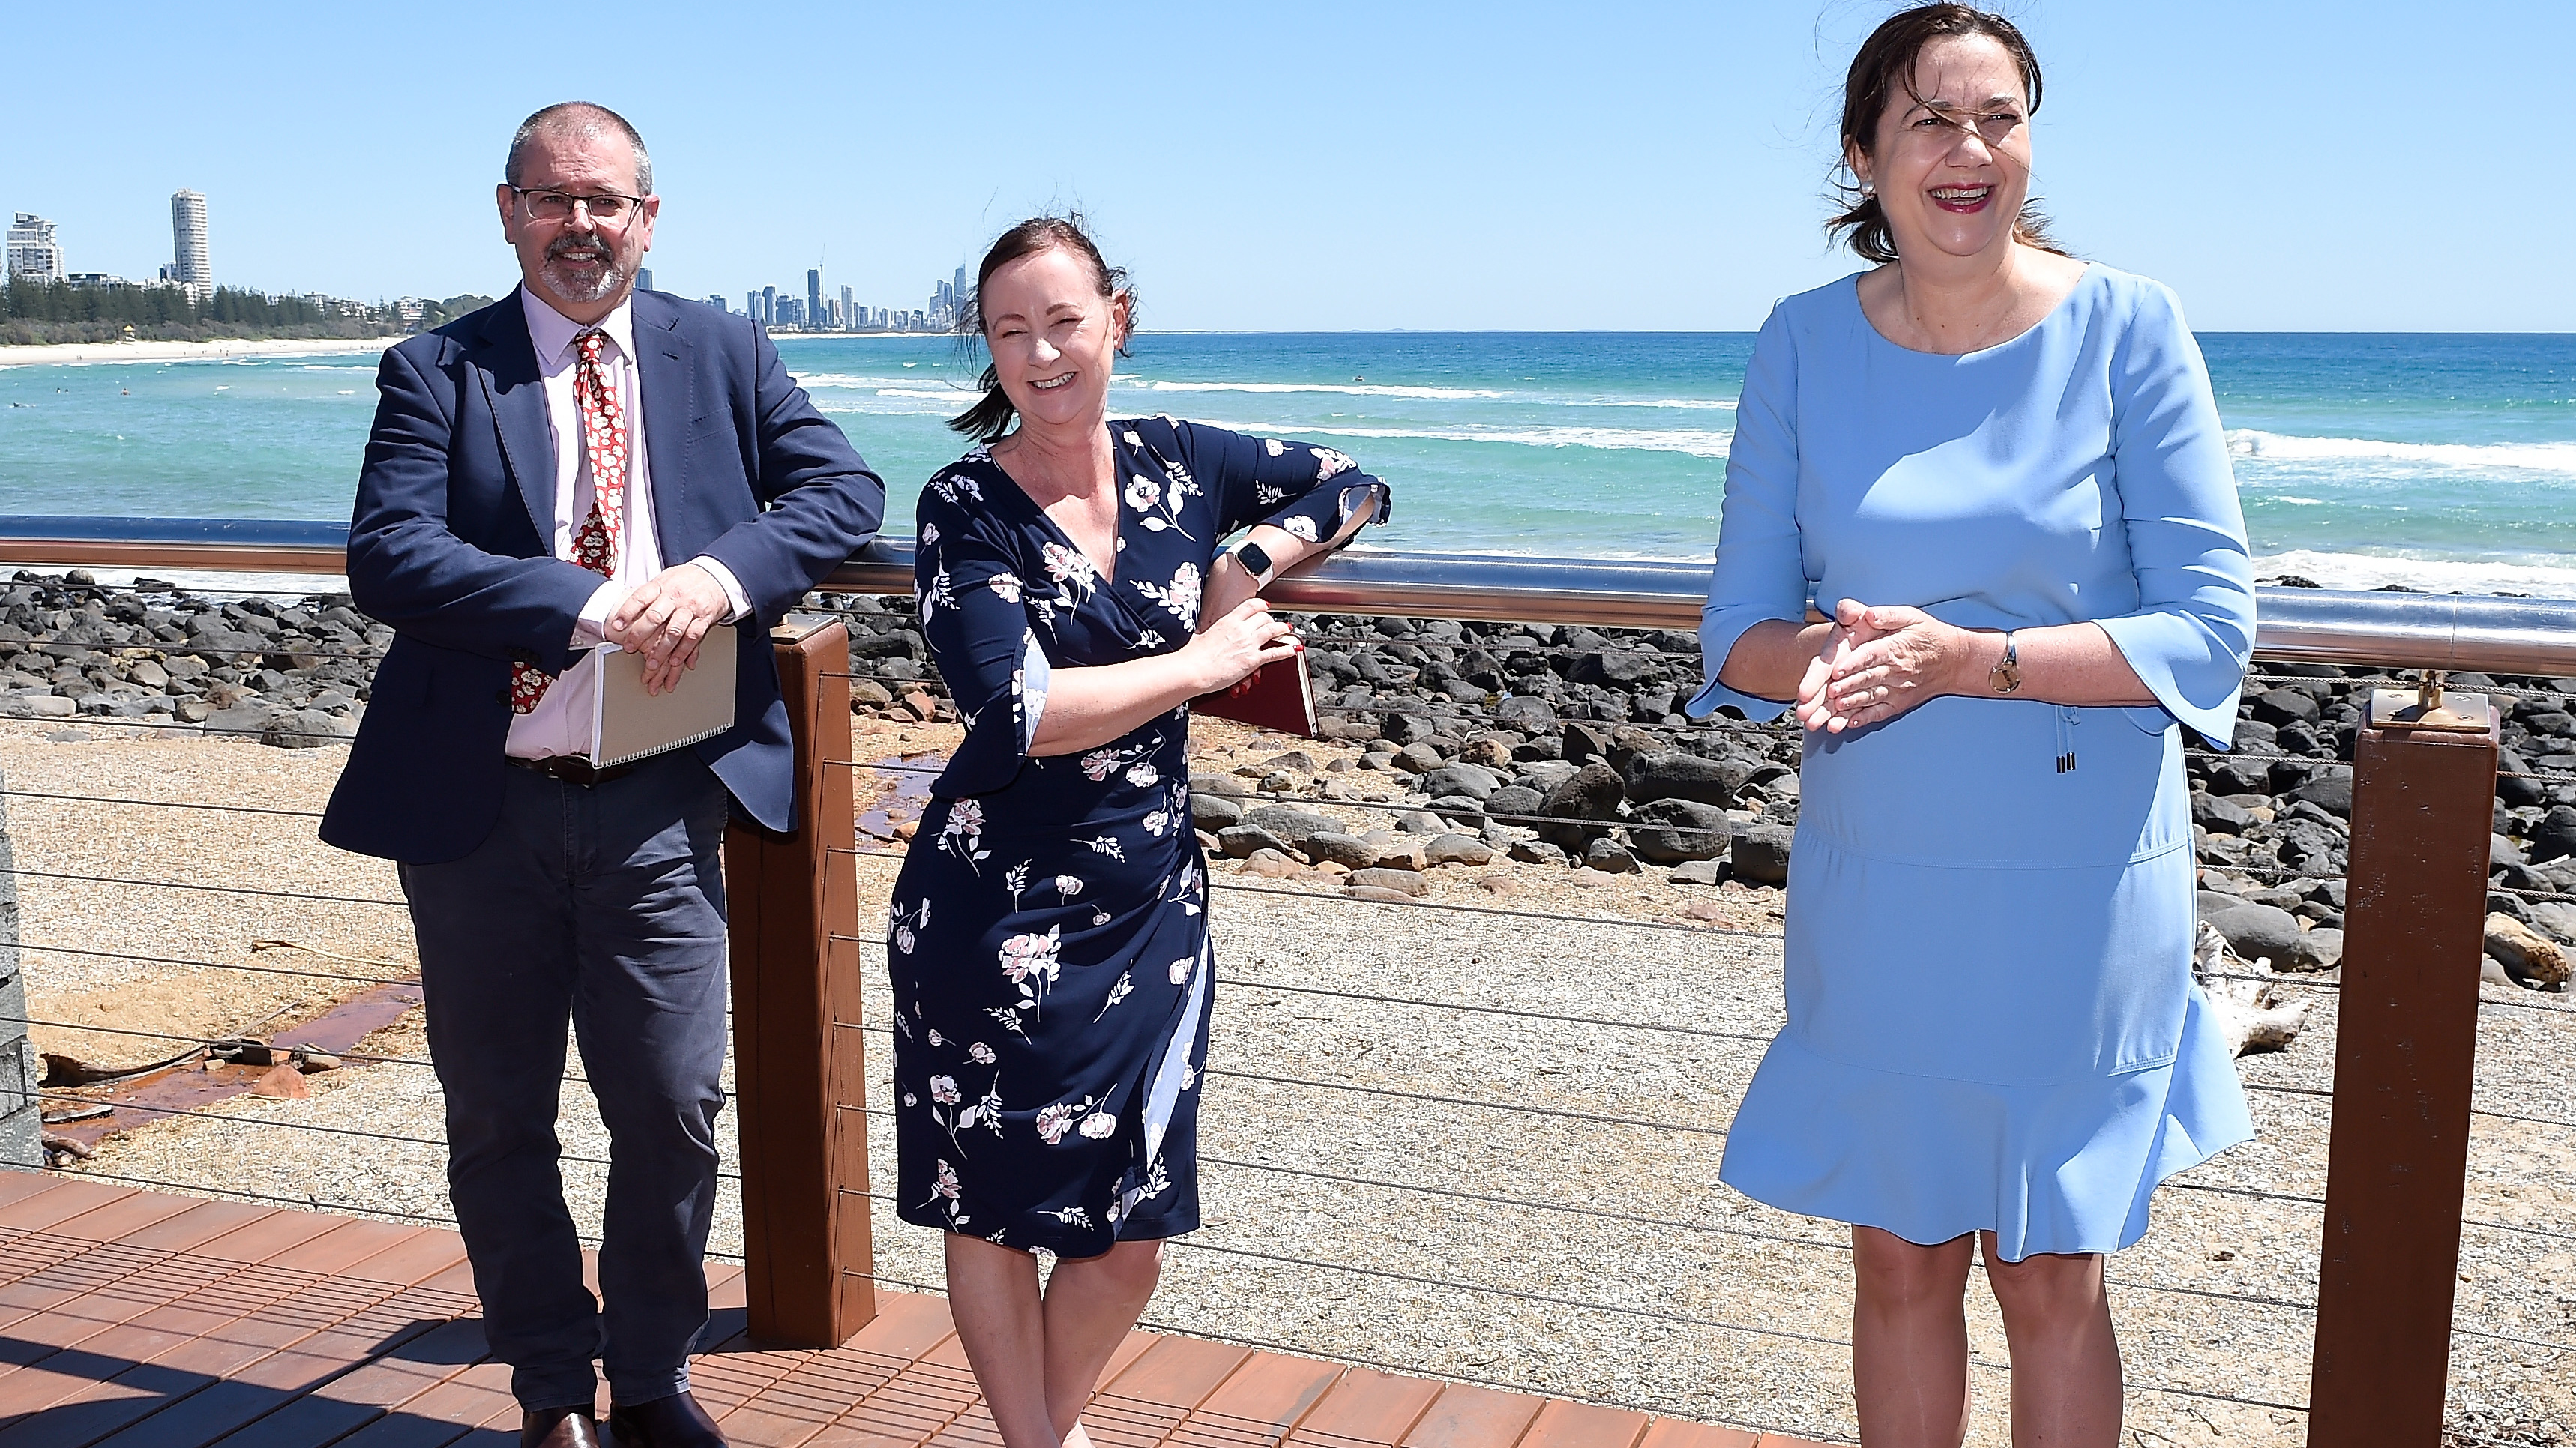 Dr Peter Aitken and Health Minister Yvette D'Ath and Premier Annastacia Palaszczuk pose for a photo in Burleigh Heads.